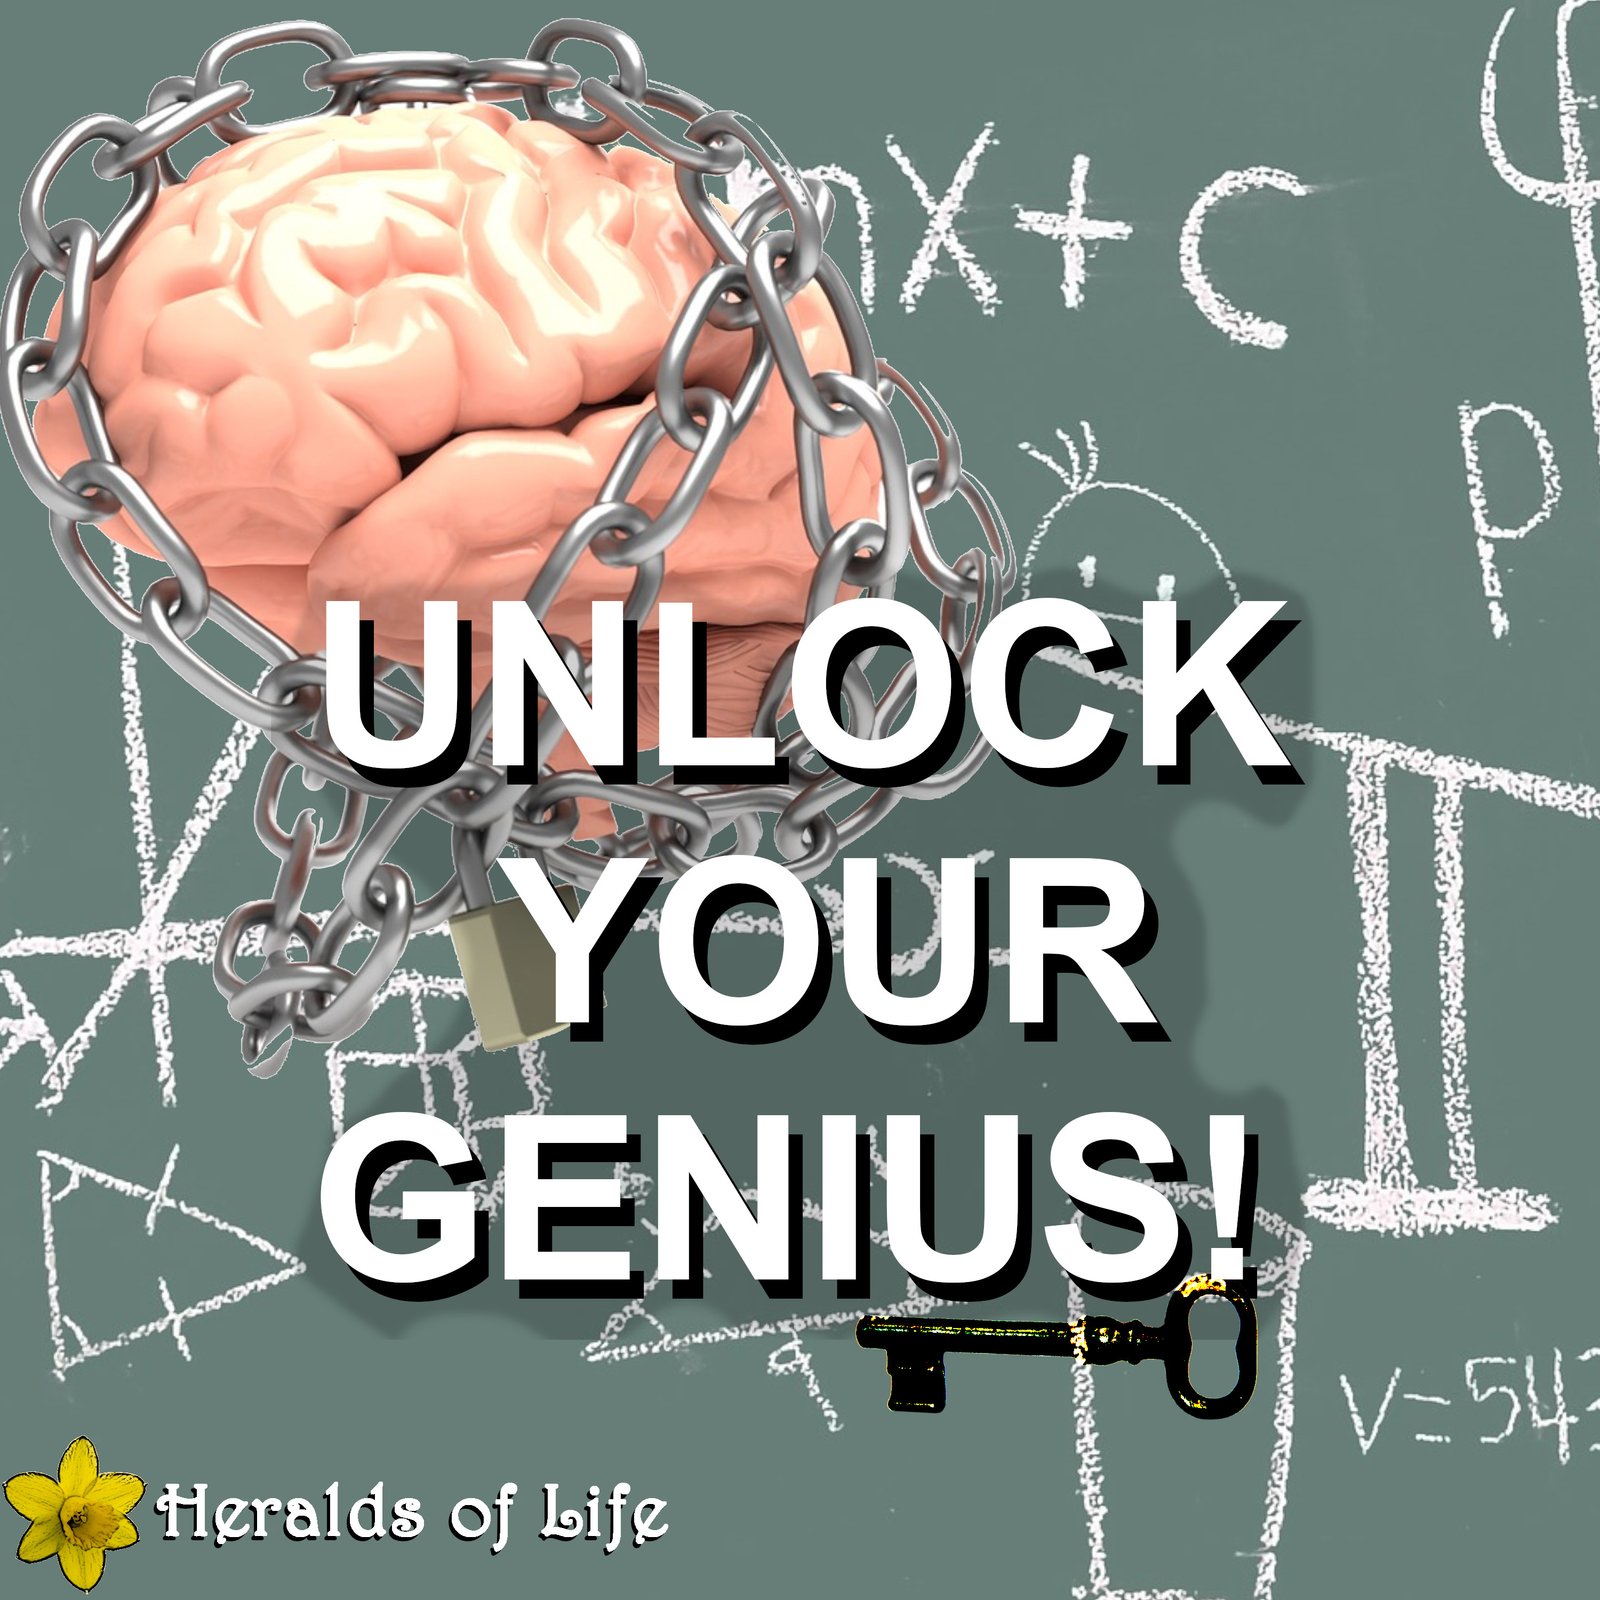 Unlock Your Genius: Personal Development made simple and understandable